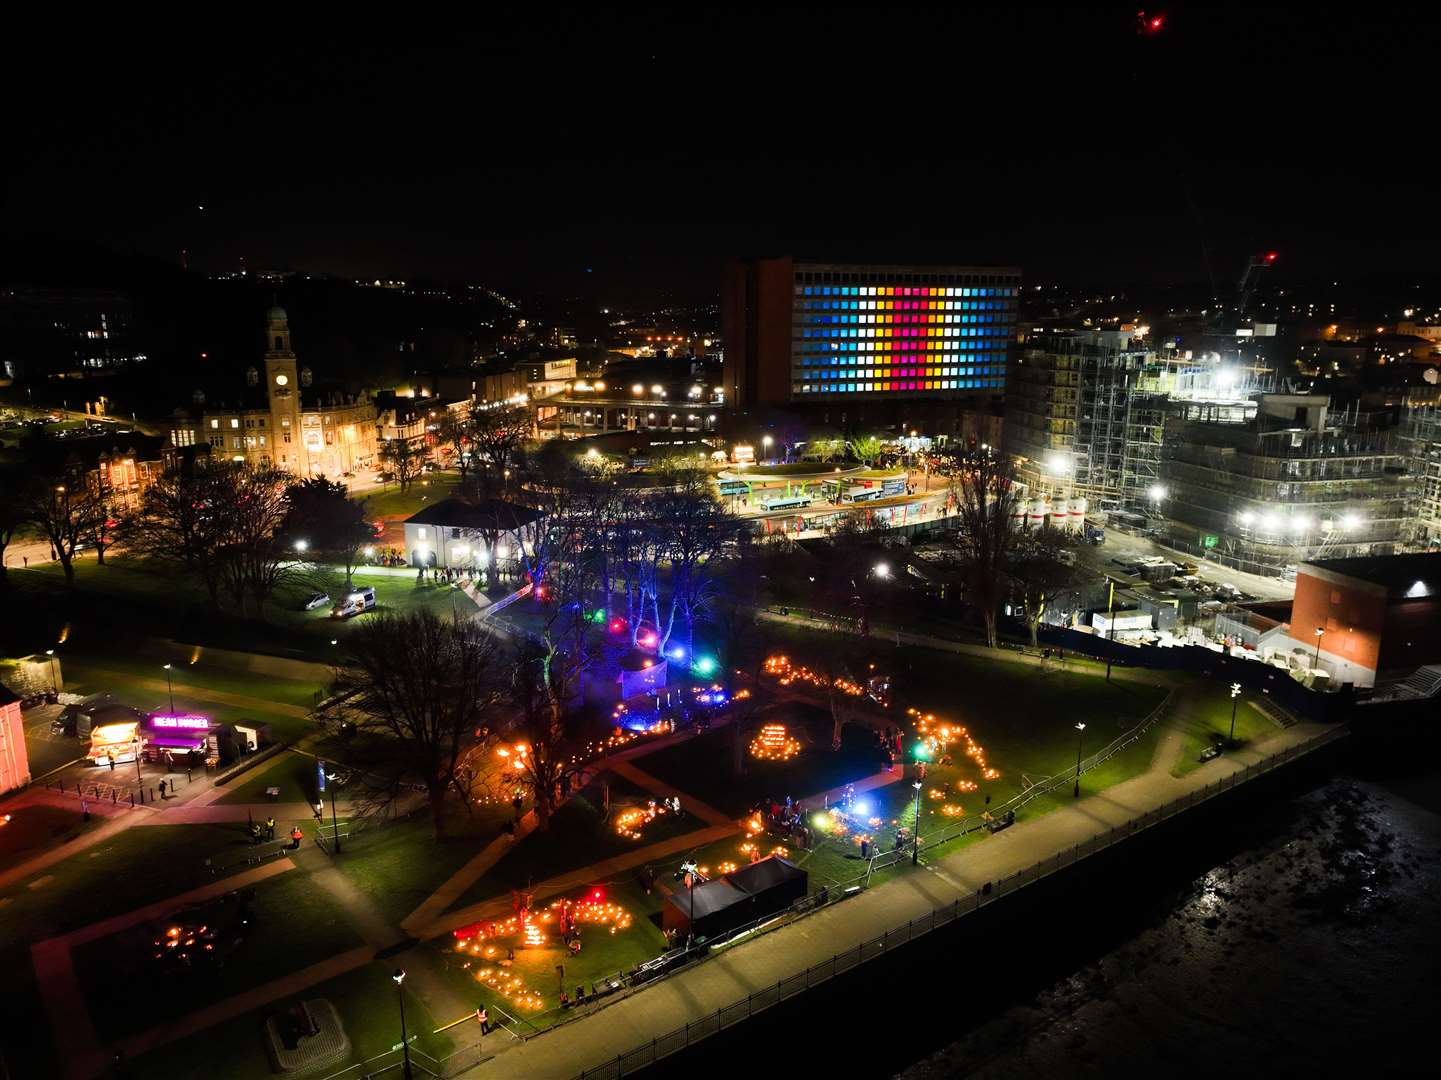 Mountbatten House was transformed into a 12-storey-high light display